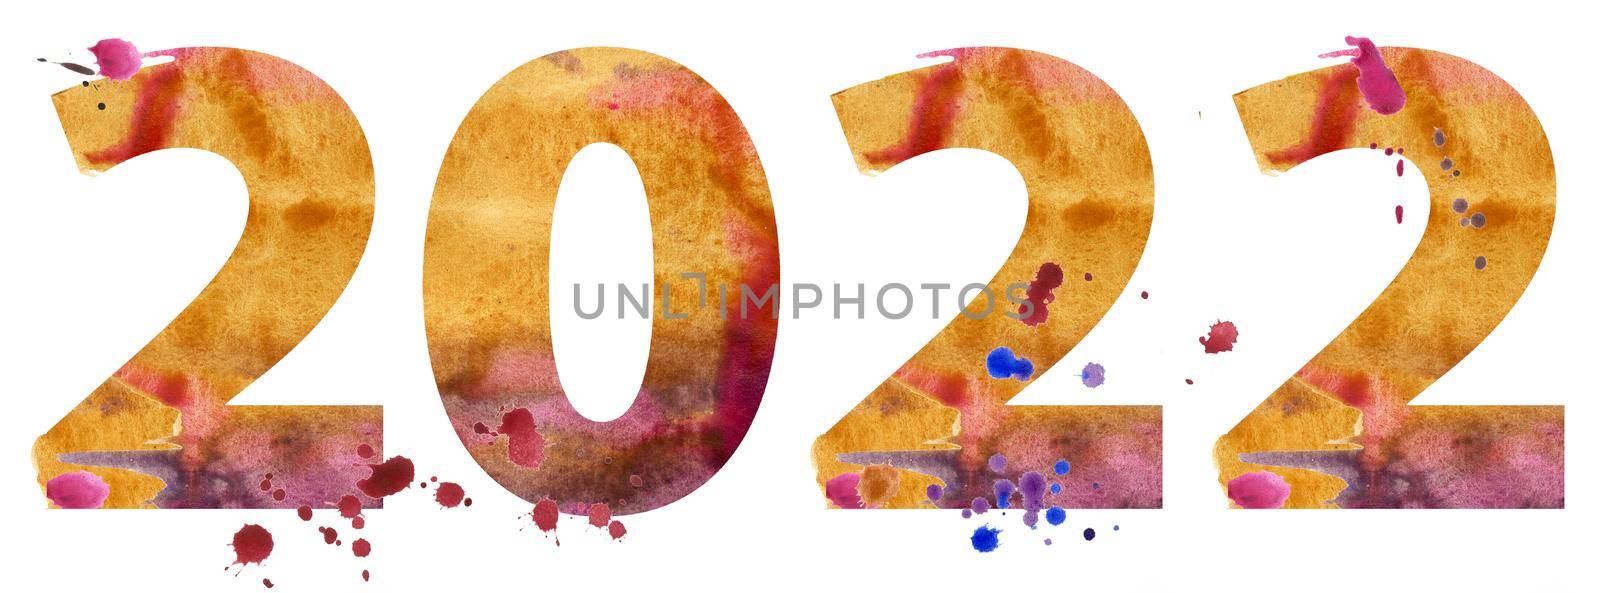 New year 2022 watercolor number isolated on the white background